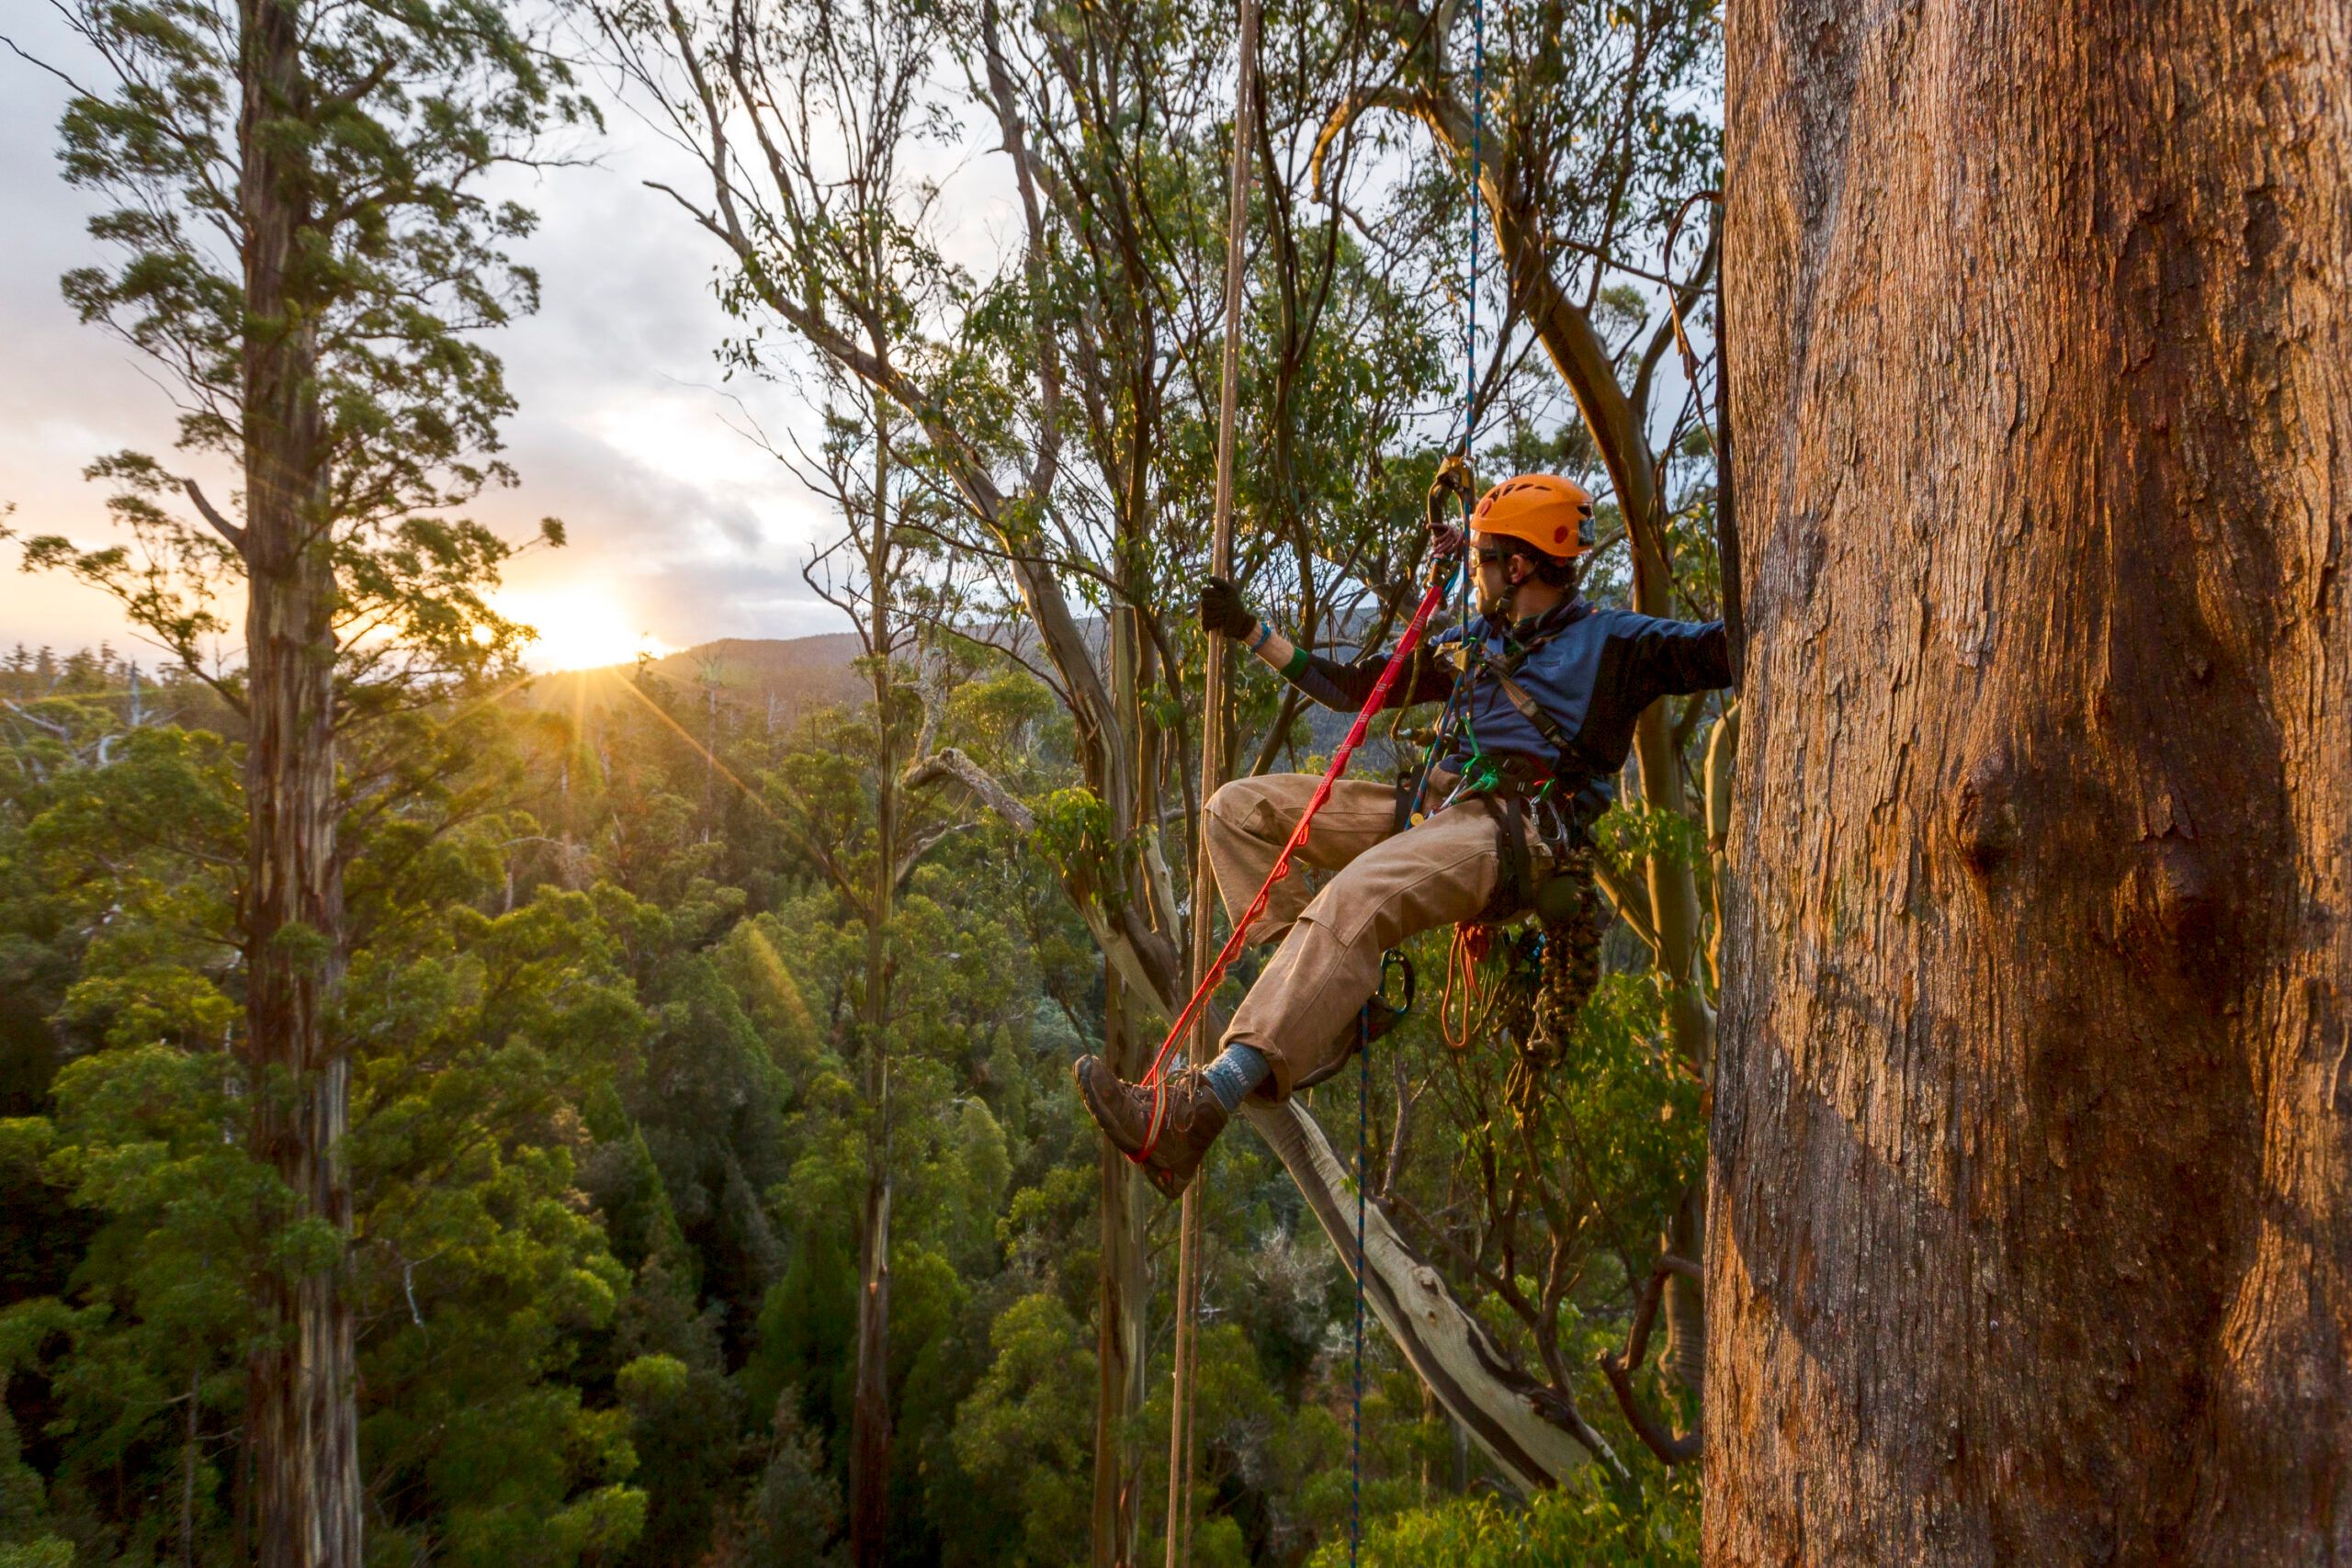 The Tasmanian Tree Project: Exploring the World’s Tallest Flowering Tree